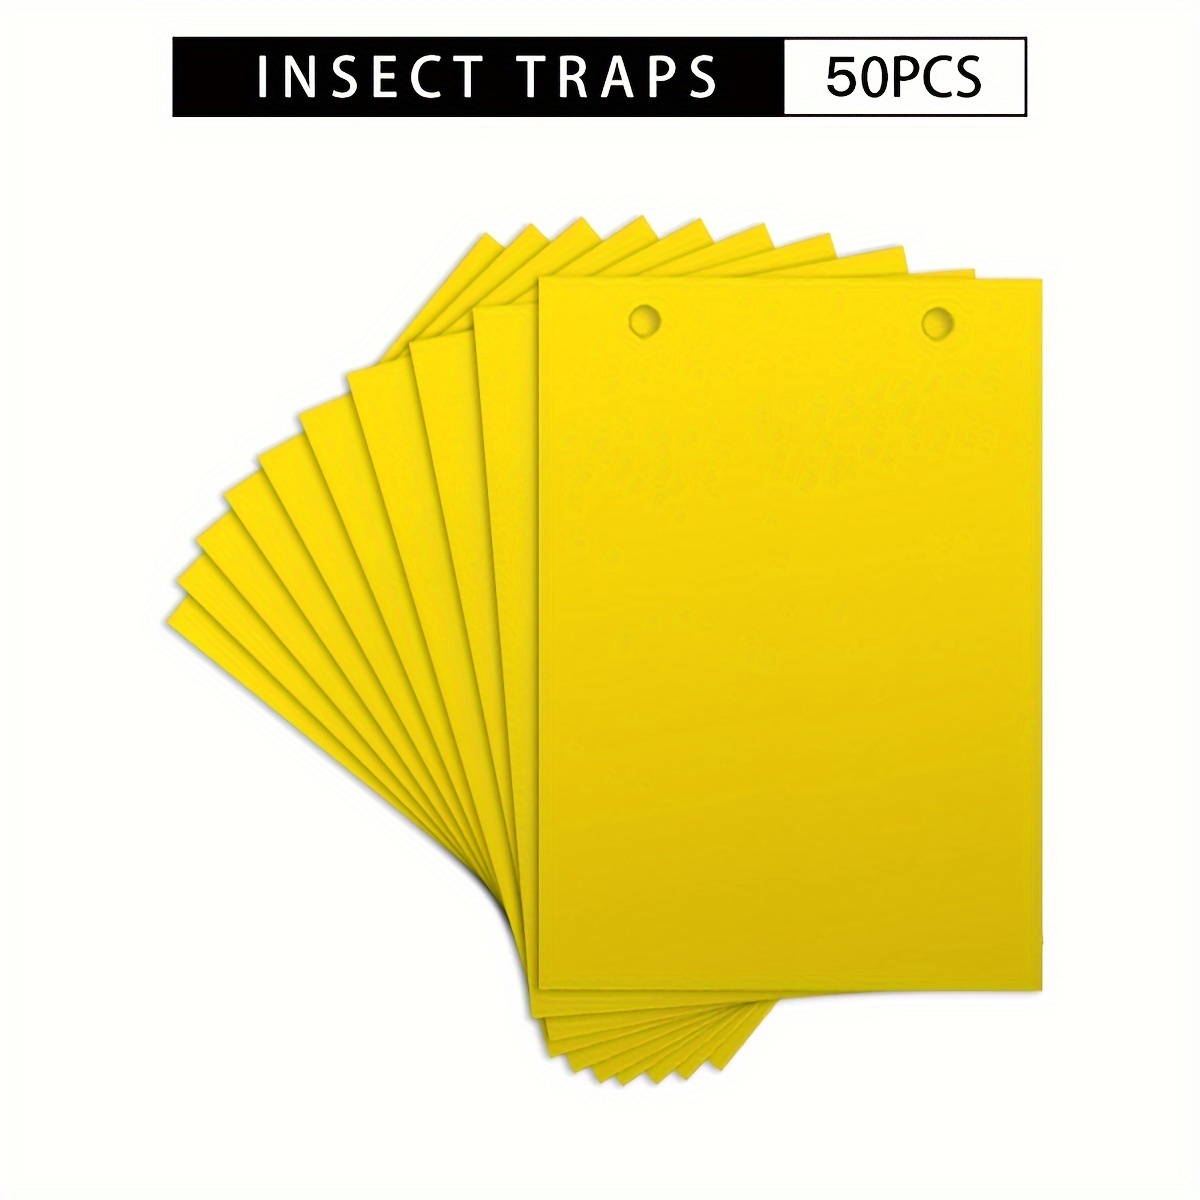 

50pcs, Yellow Insect Traps Strongly Stick To Vegetables, Fruits, And Plants For Protection And Trapping Of Flying Insects